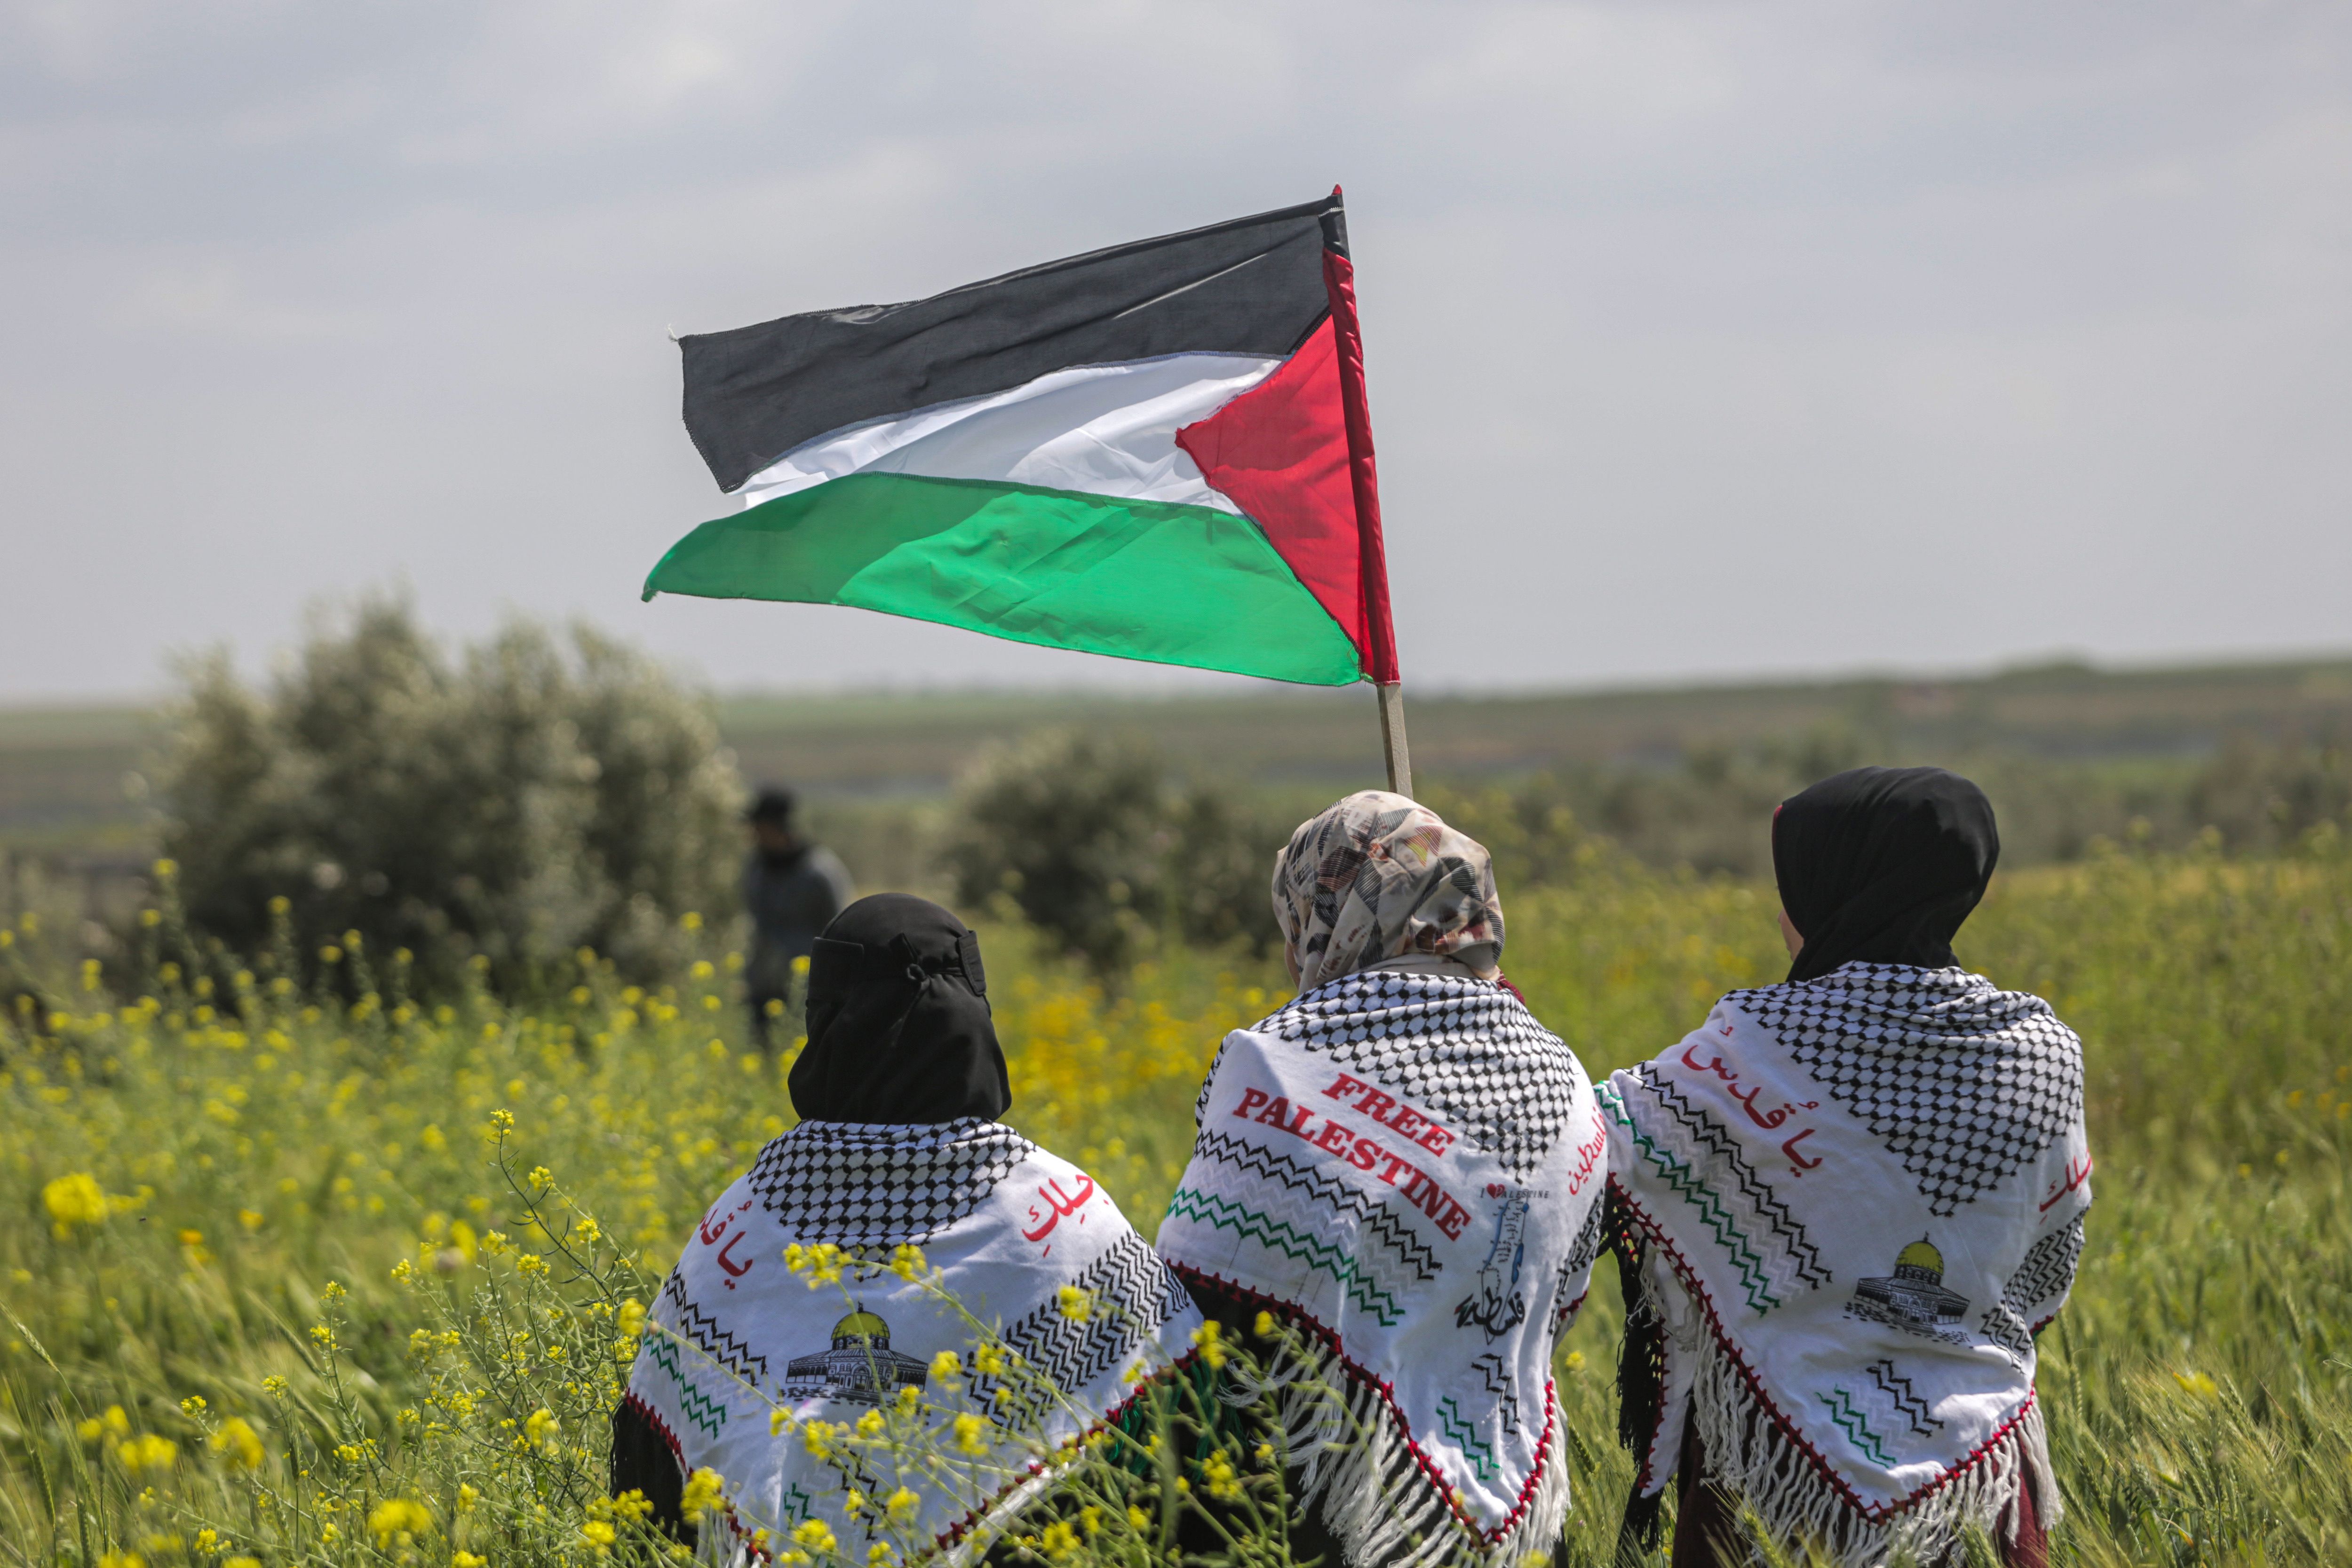  Palestinian holds a flag during a protest marking 'Land Day' along the border between Israel and the Gaza Strip, in the eastern Gaza Strip in March 2023.